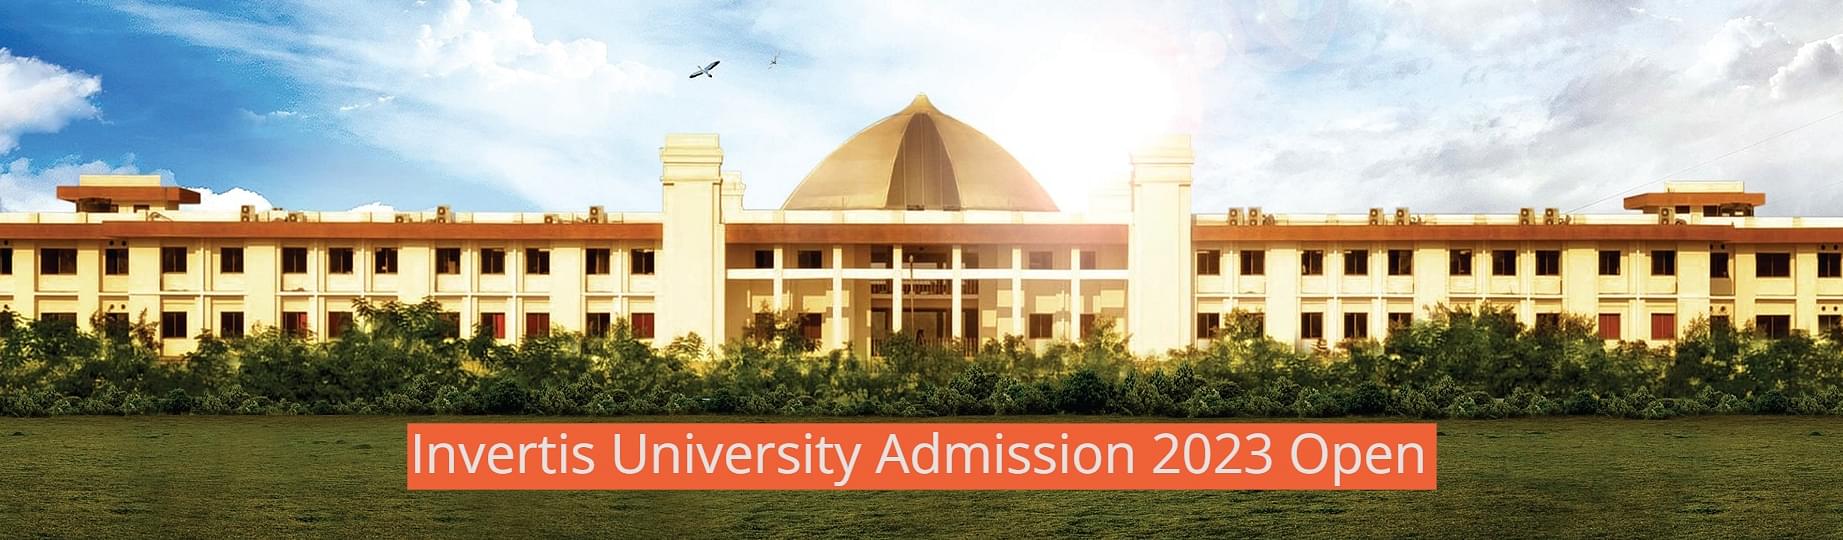 Invertis University, Bareilly, Uttar Pradesh University Page - Placement  Process | Competitions | Interviews| Articles & Videos